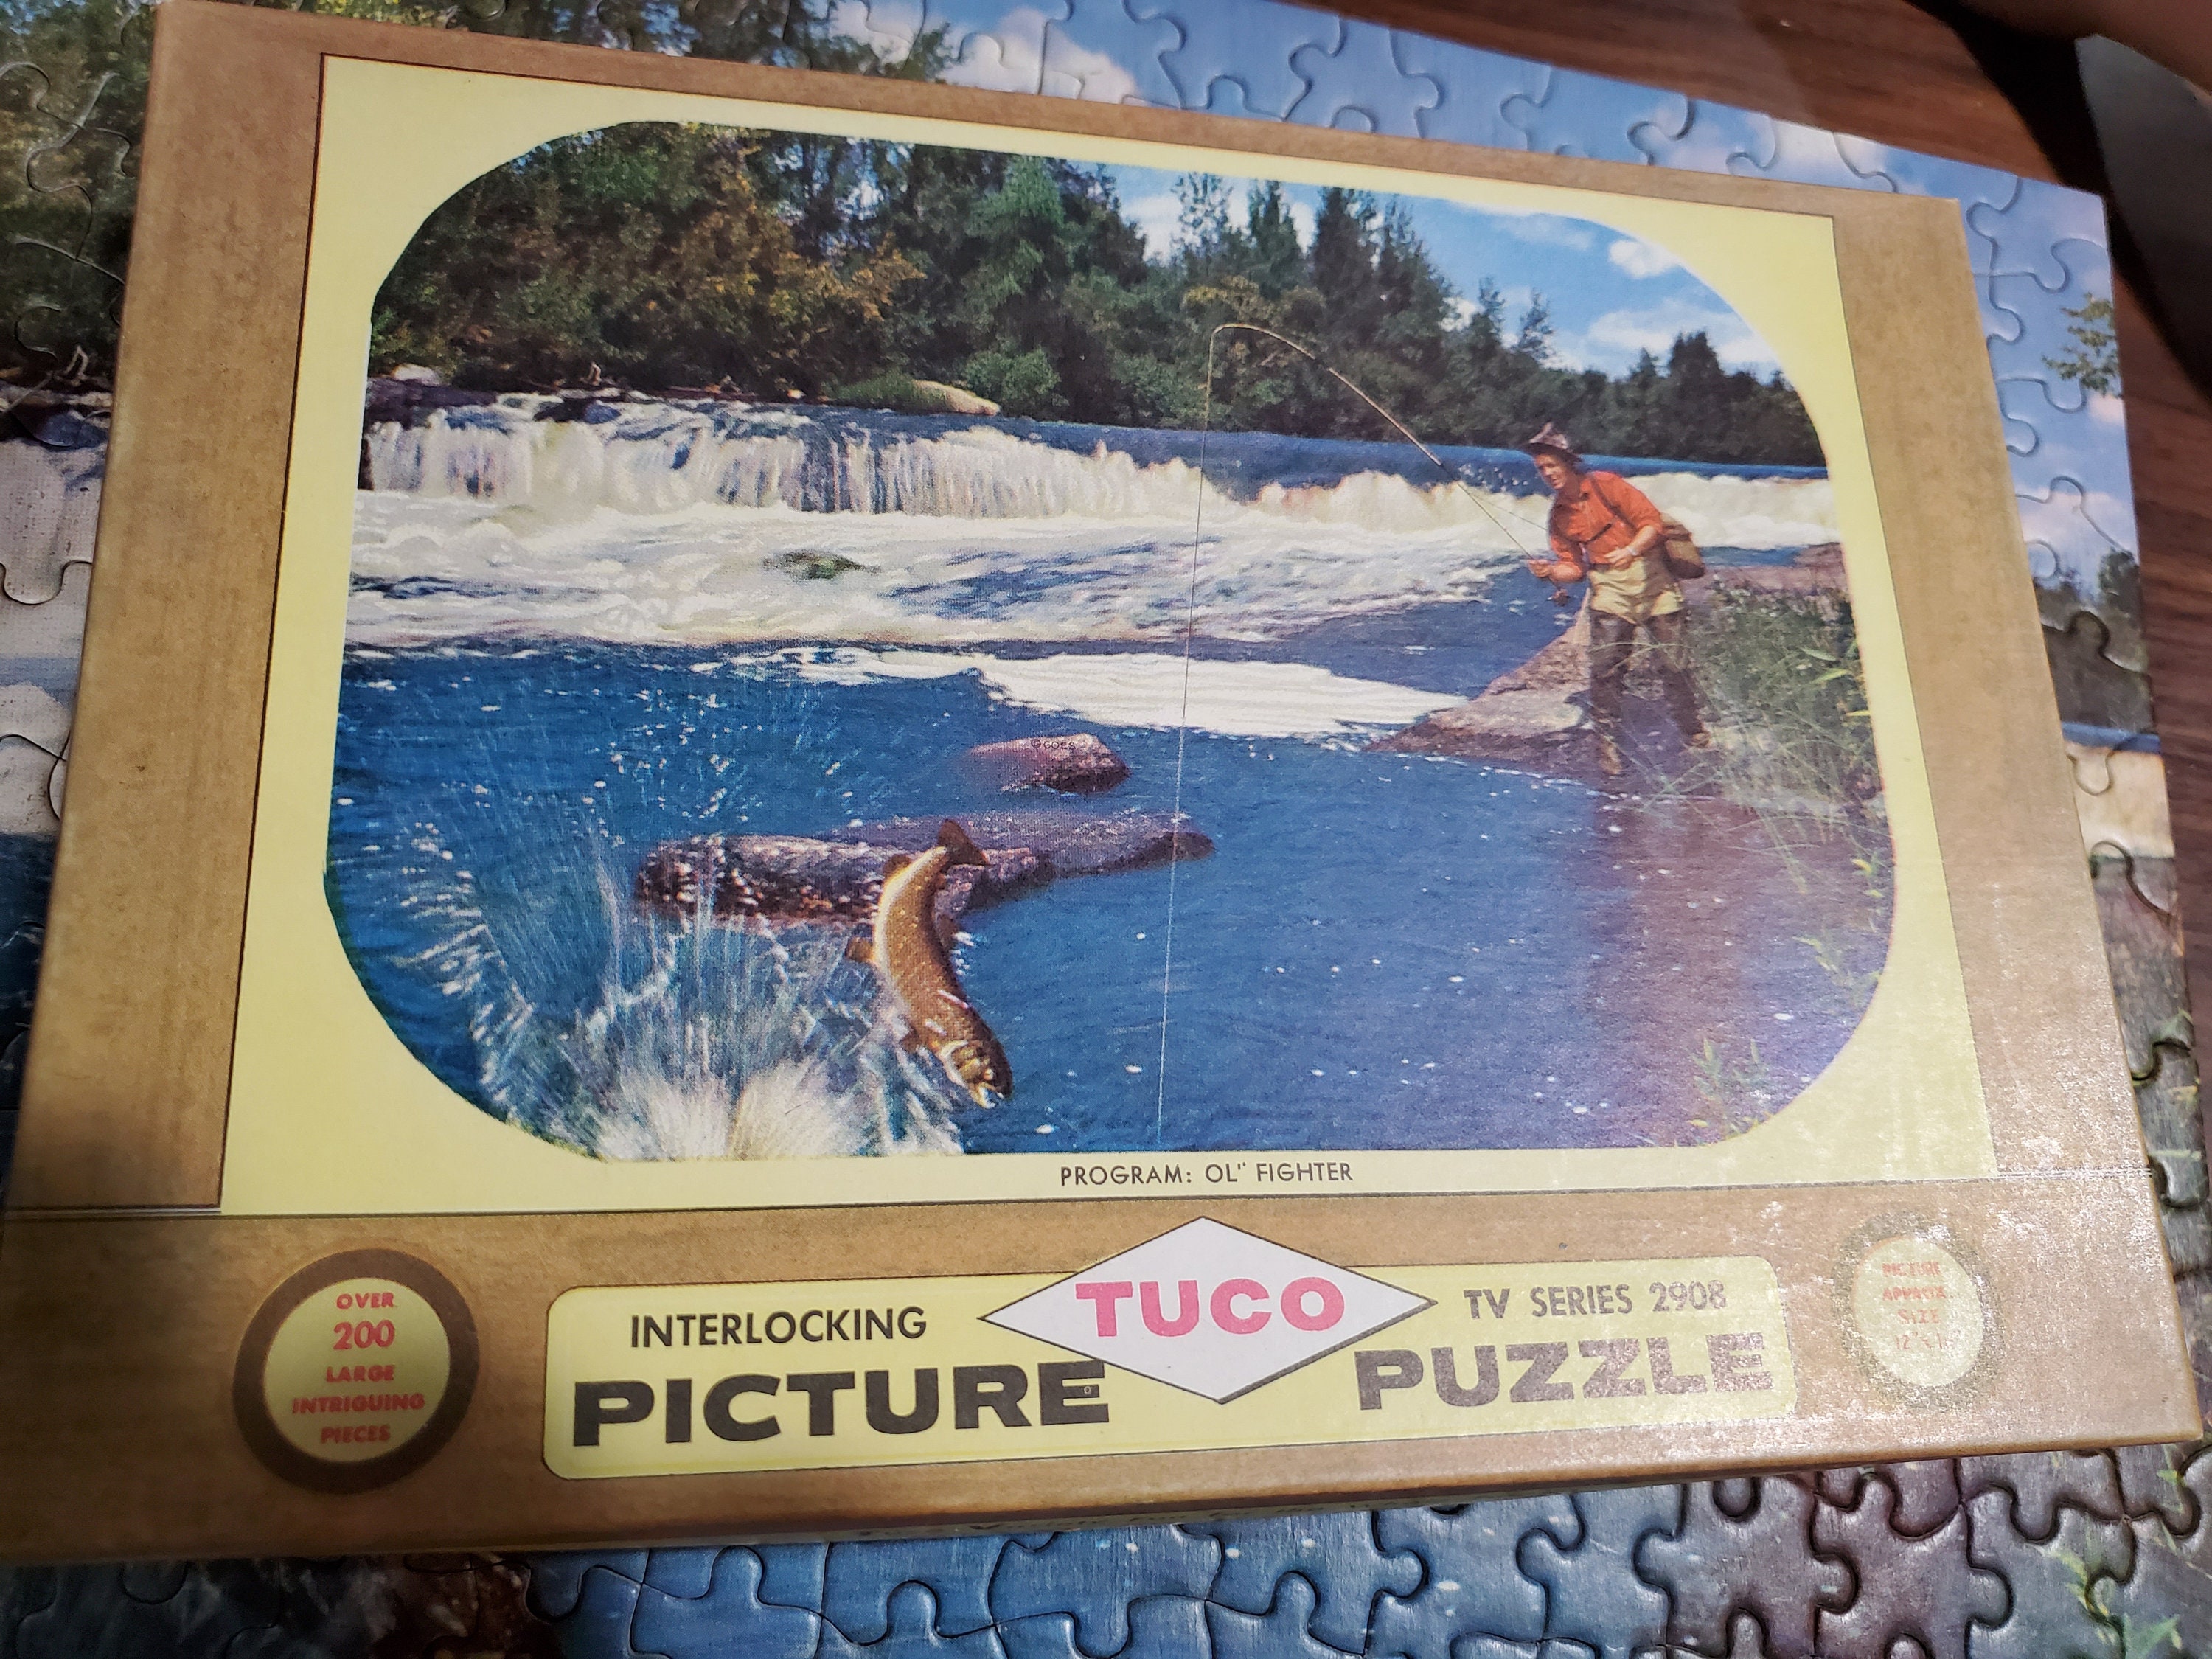 Vintage Puzzle Tuco TV Series 2908 Deluxe Picture Puzzle Tuco Picture Puzzle Ol Fighter Vintage Puzzle